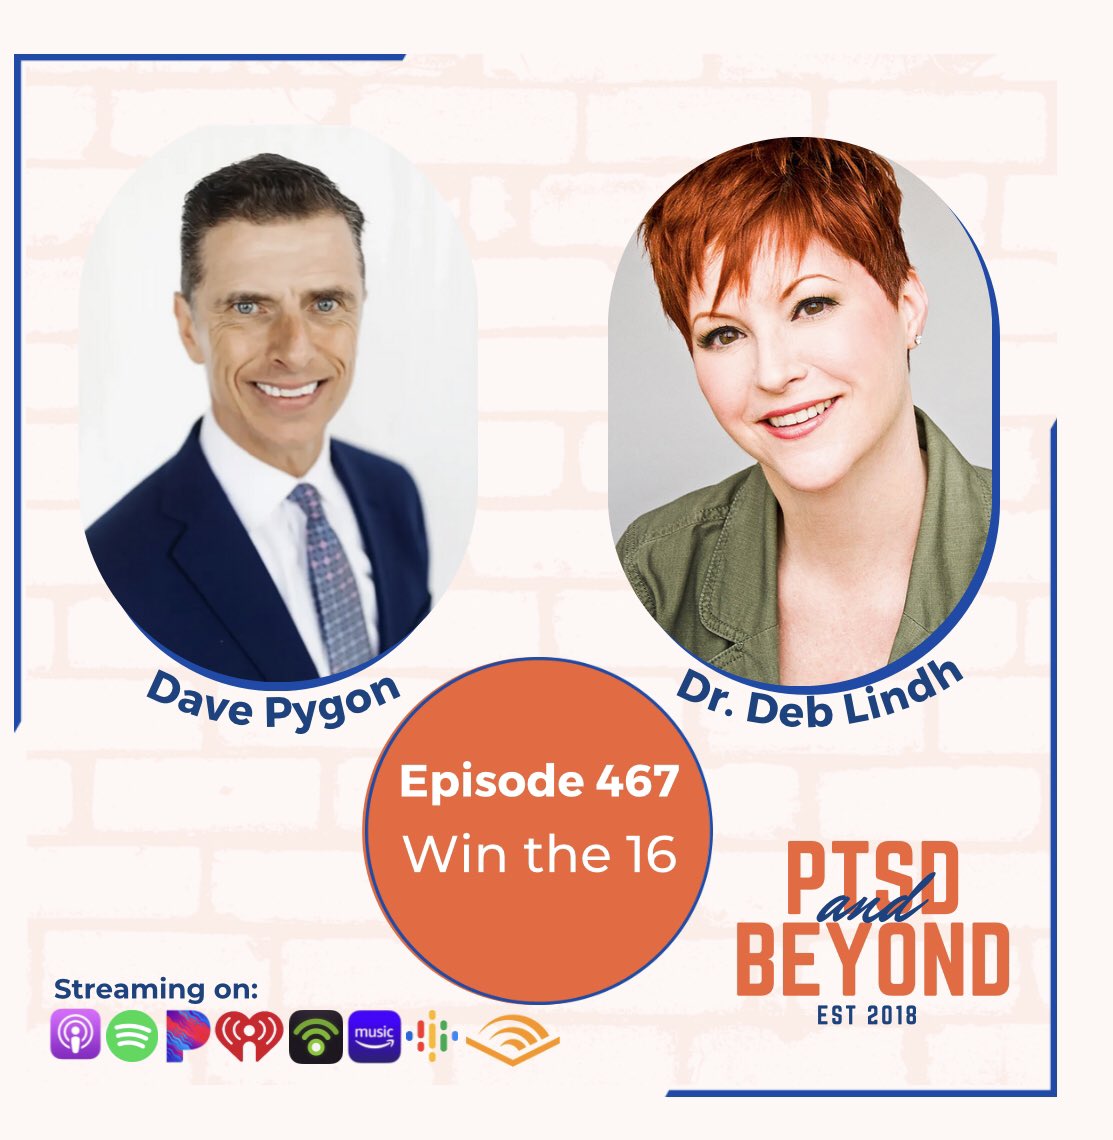 DROPPING #PTSDandBeyond #podcast episode with guest Dave Pygon @PygonOne where we chat about mindset, determination, and being our best self! Listen >> ptsdandbeyond.podbean.com/e/dave-pygon/ and @Spotify @ApplePodcasts and were you find your podcasts! #mentalhealth #Inspiration